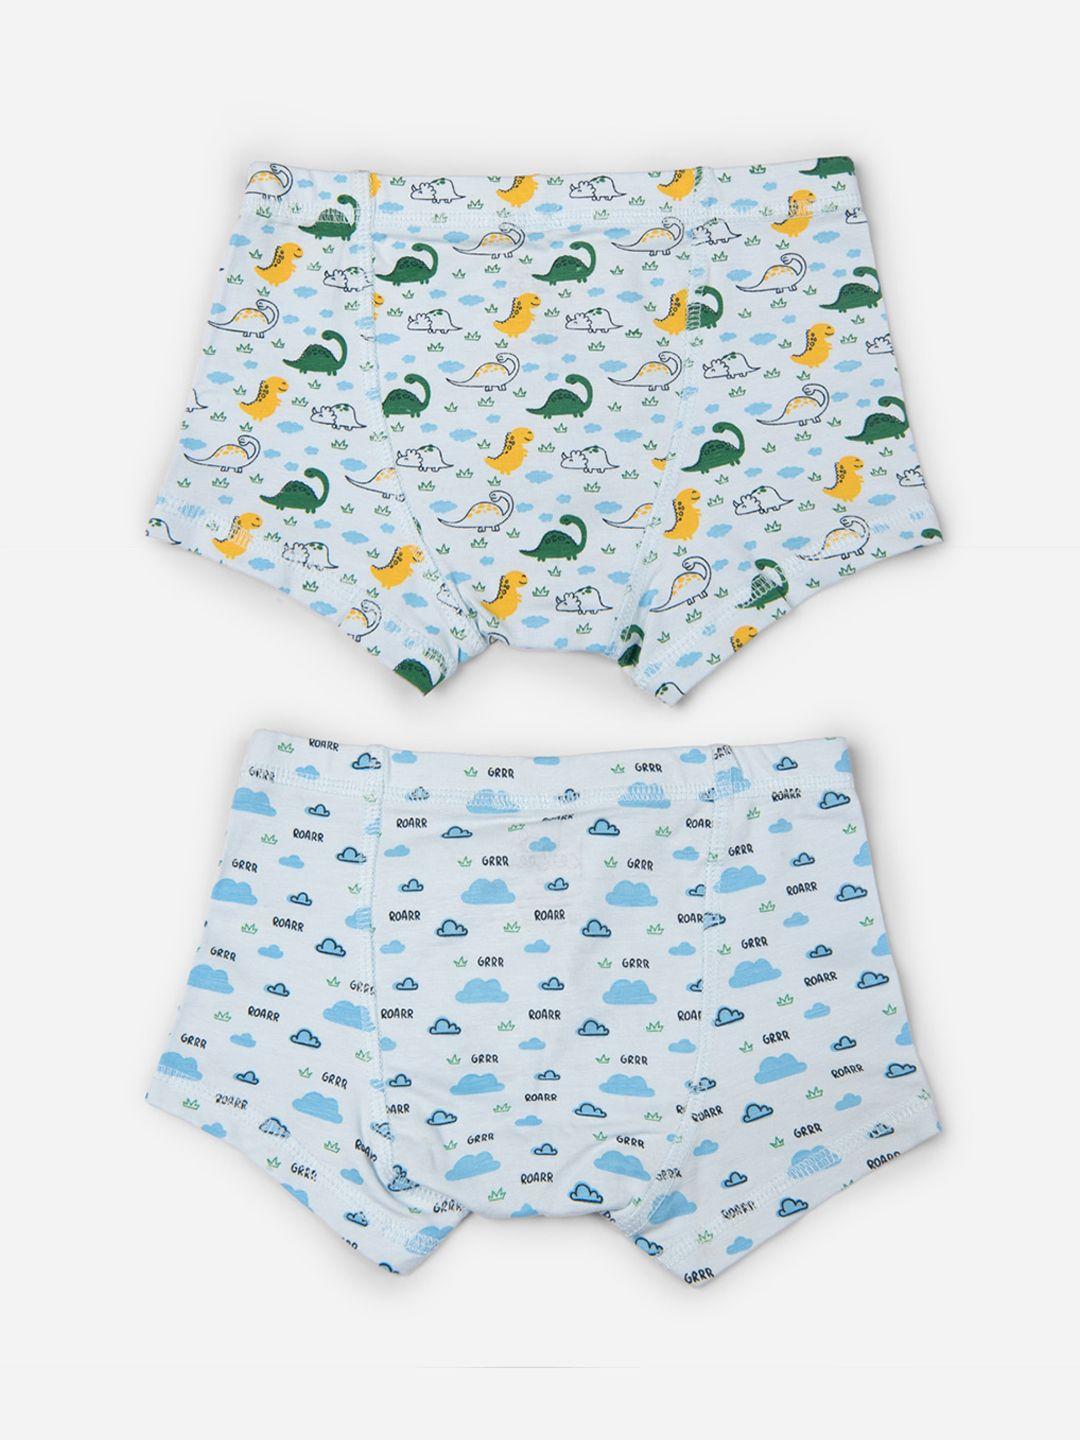 keebee boys pack of 2 printed organic cotton boxer-style briefs bbox_dino_1_2